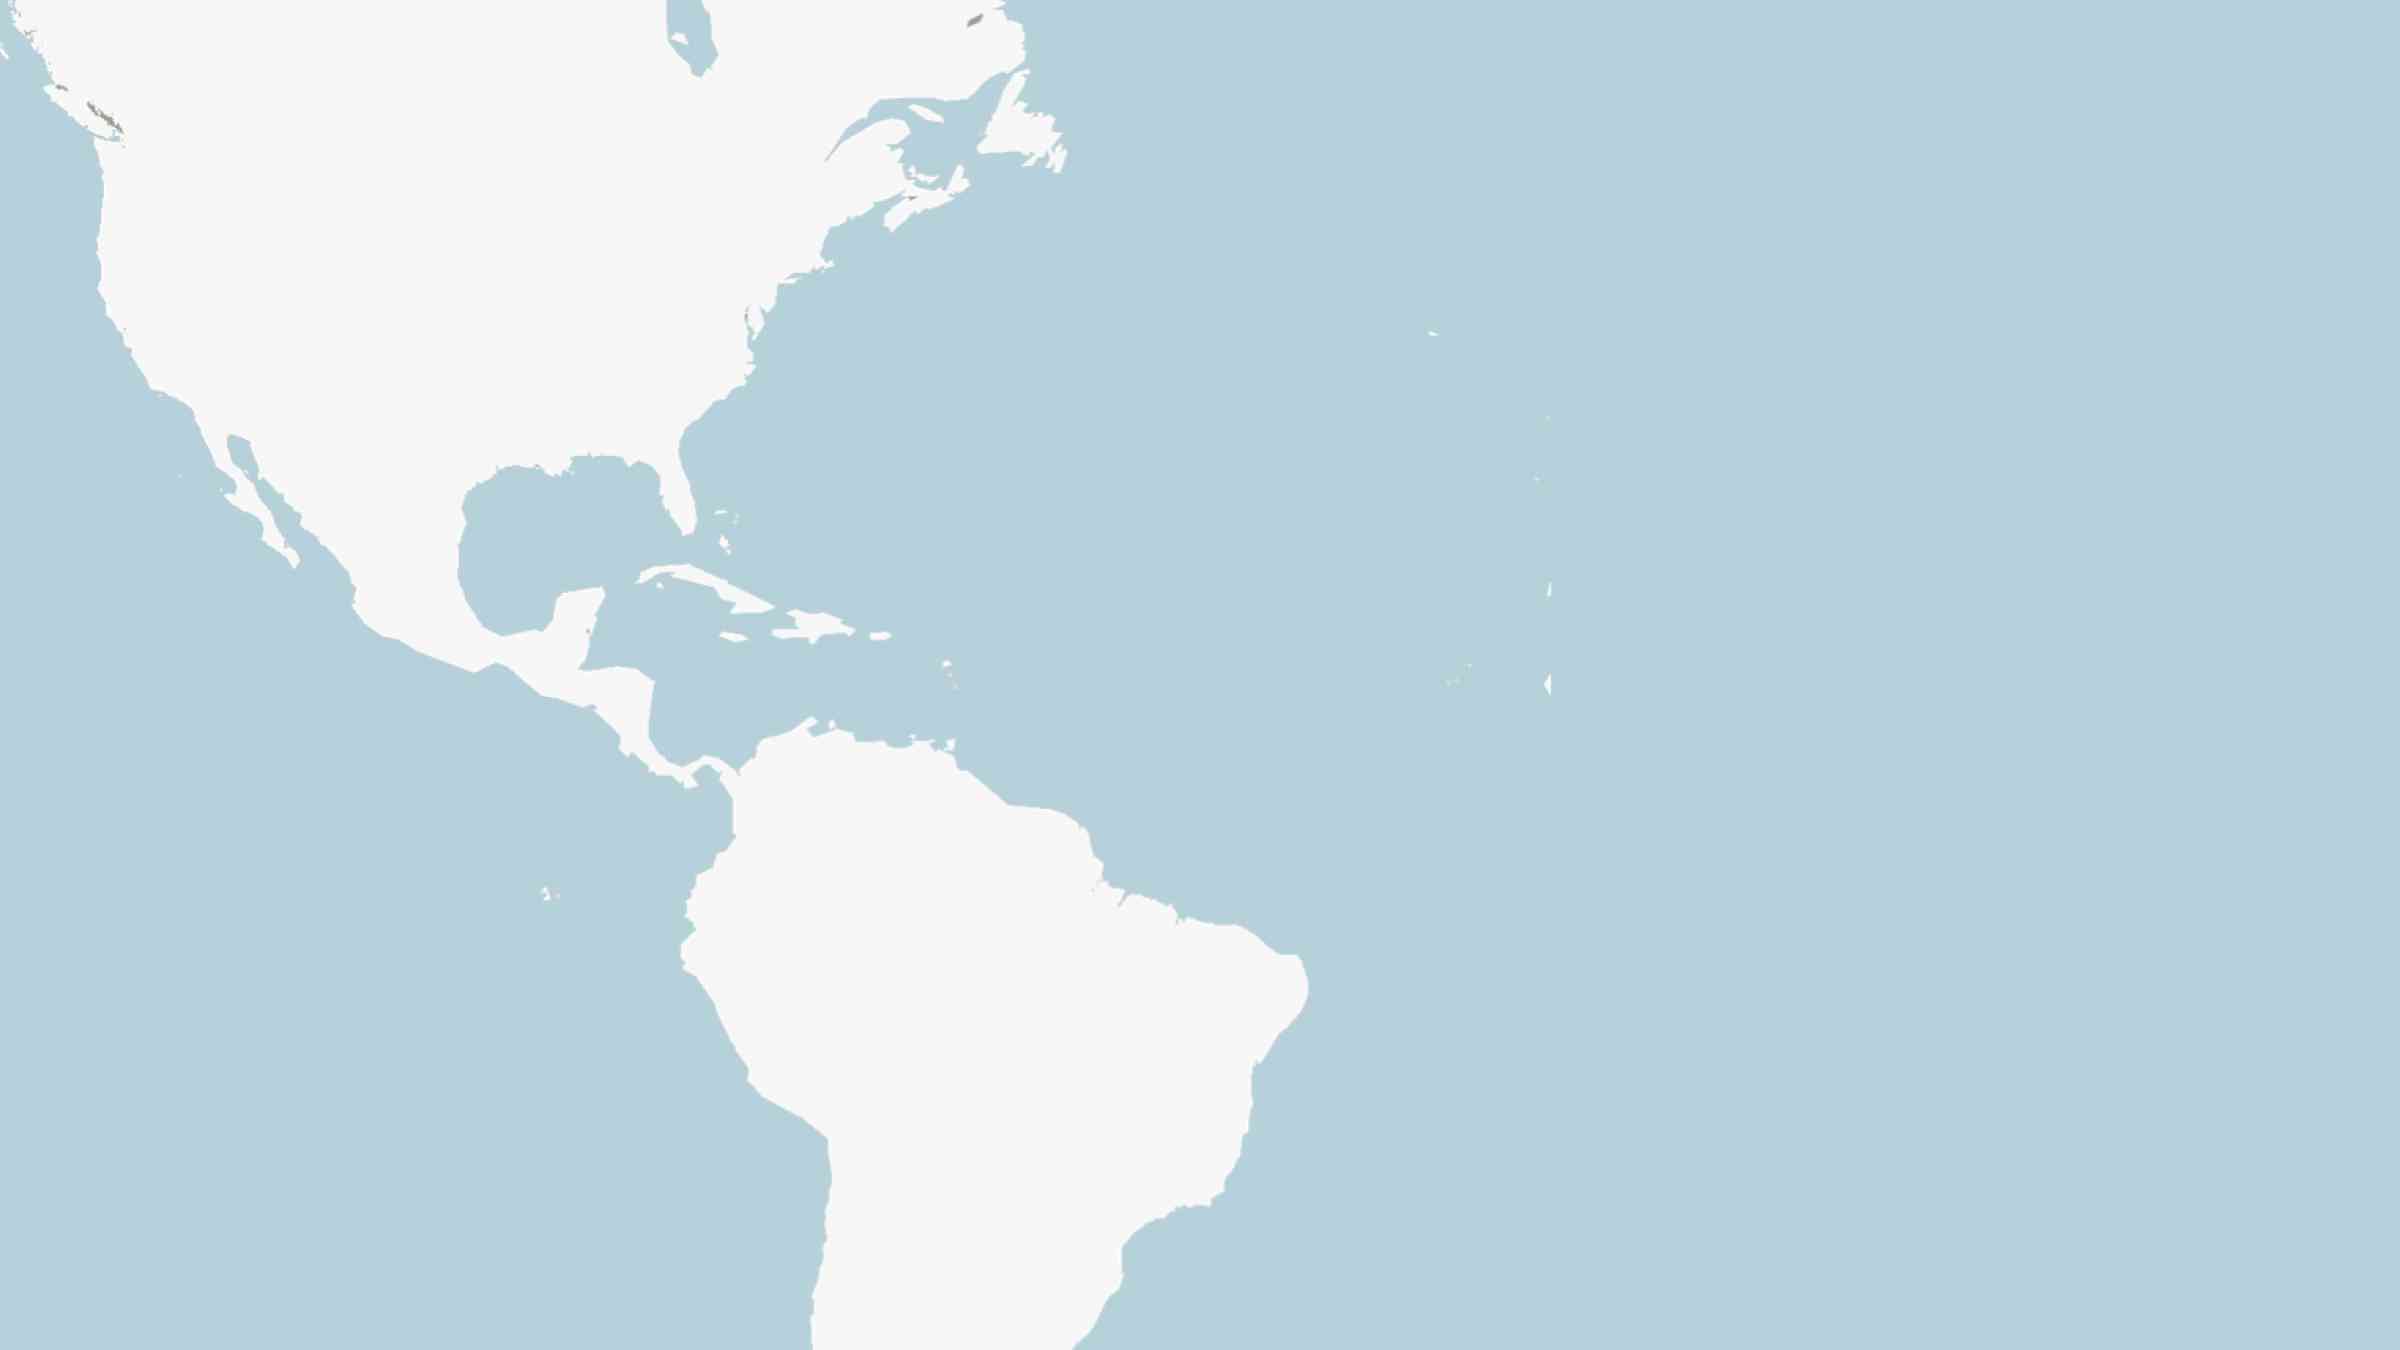 A blank map of North and South America with a blue background 